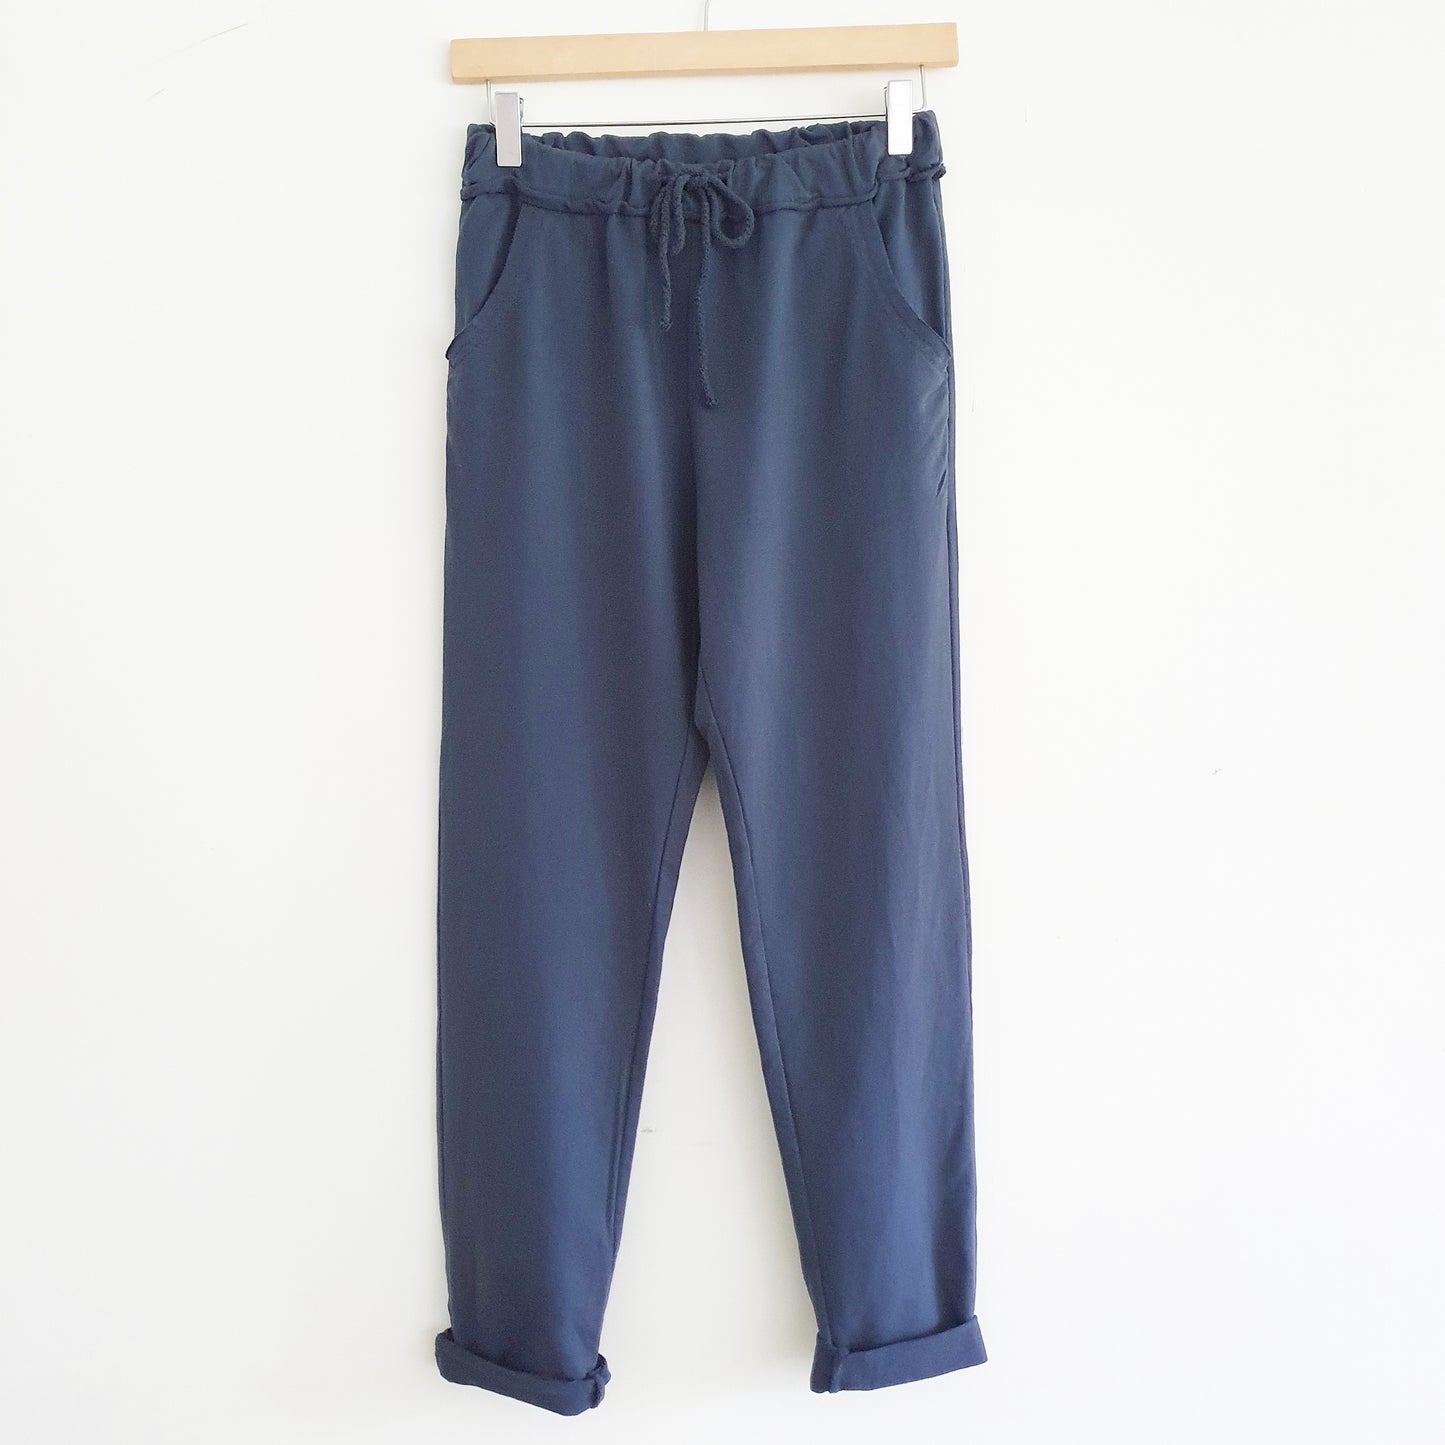 Cotton Lounge Pants in Navy